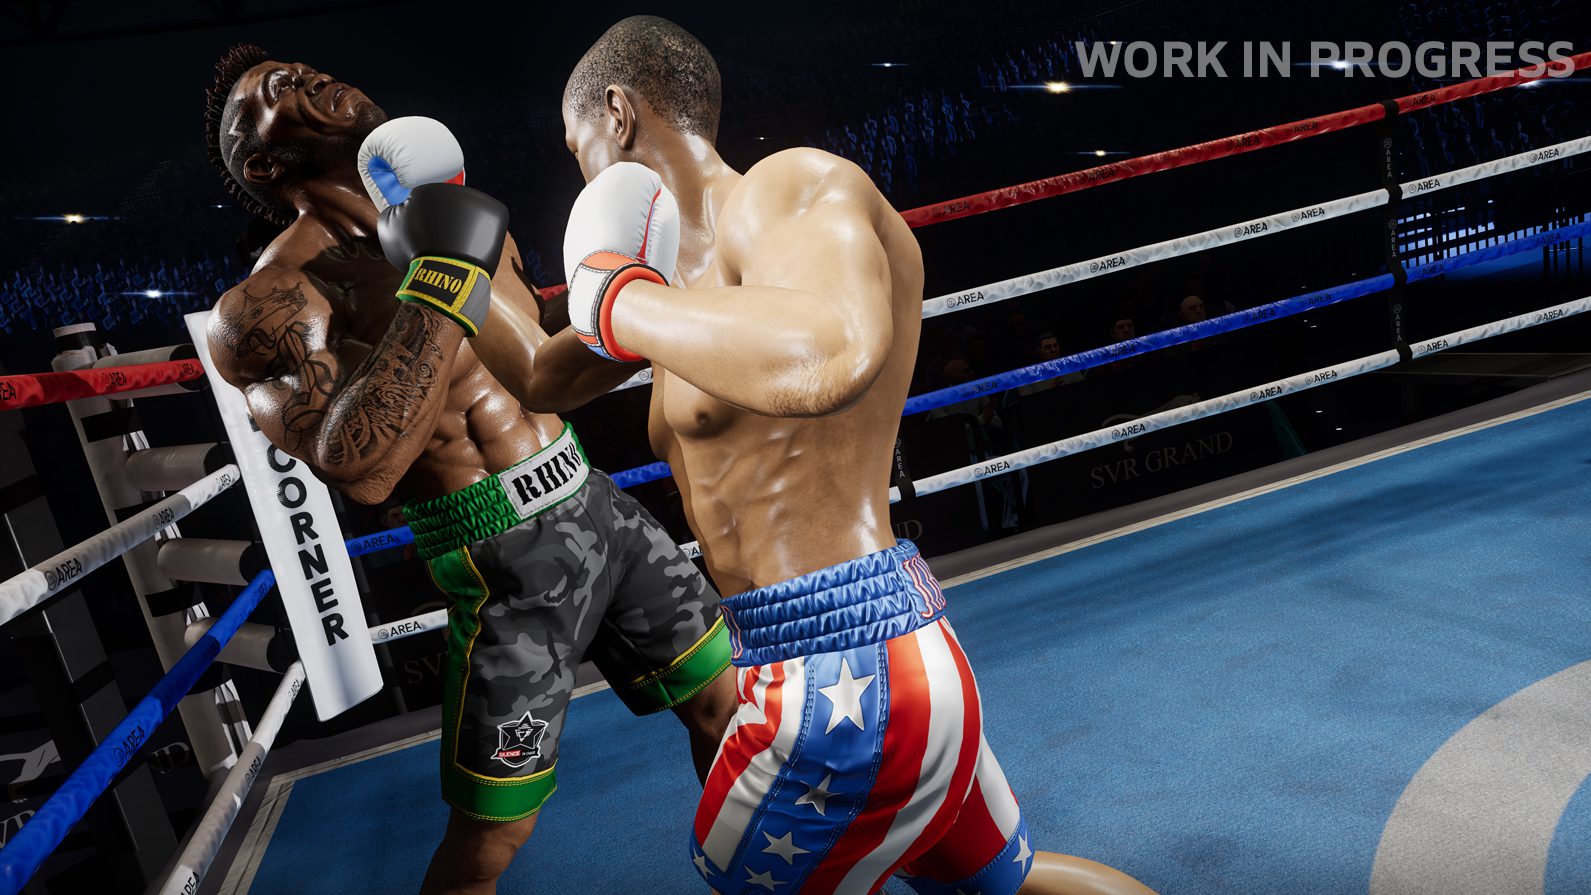 Creed: Rise to Glory Puts You In The Middle Of The Action